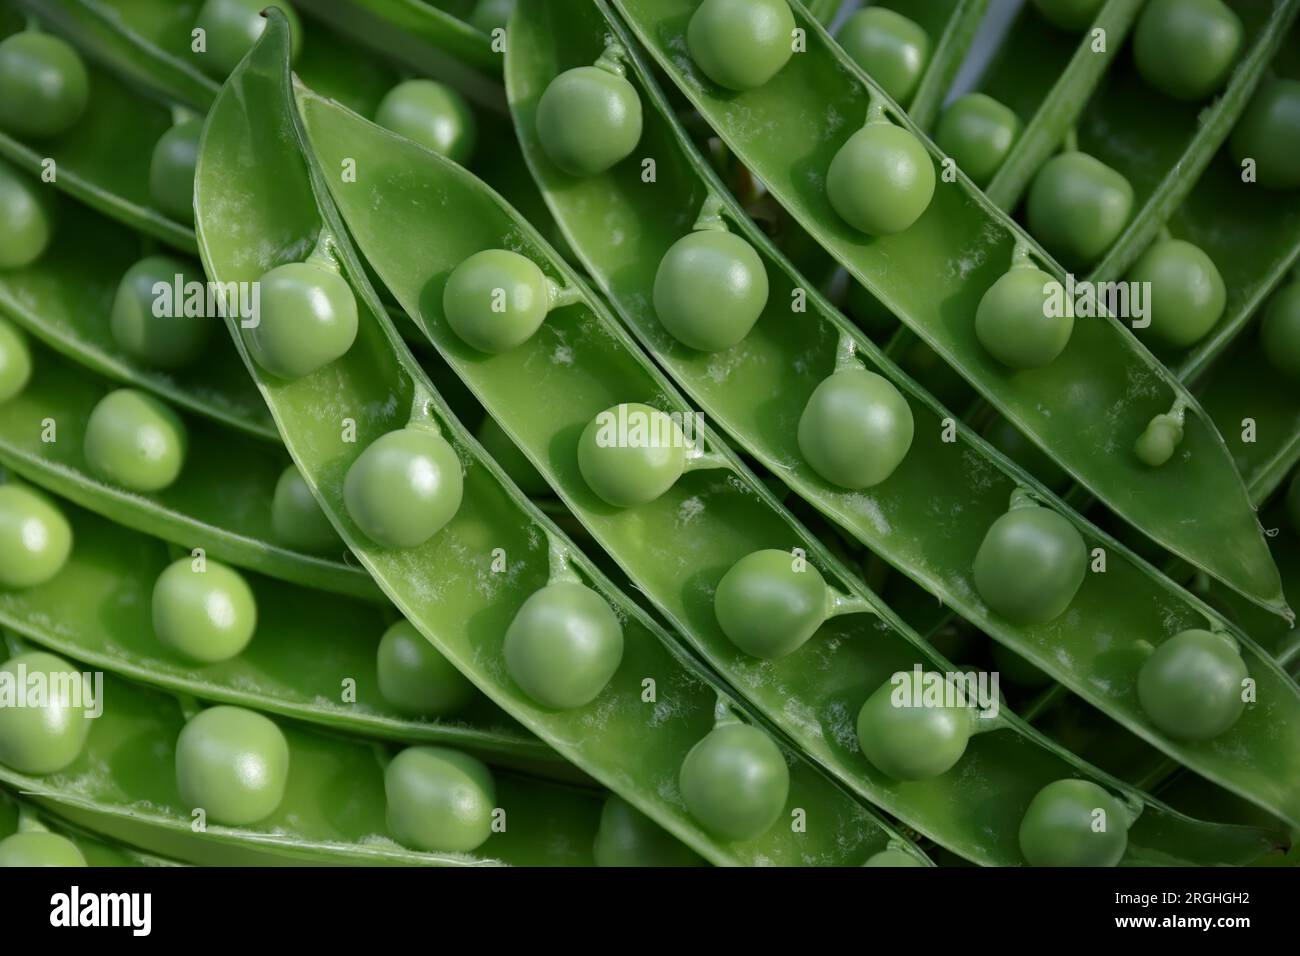 Grains of green young peas in open pods. Harvest of ripe fresh peas. Stock Photo